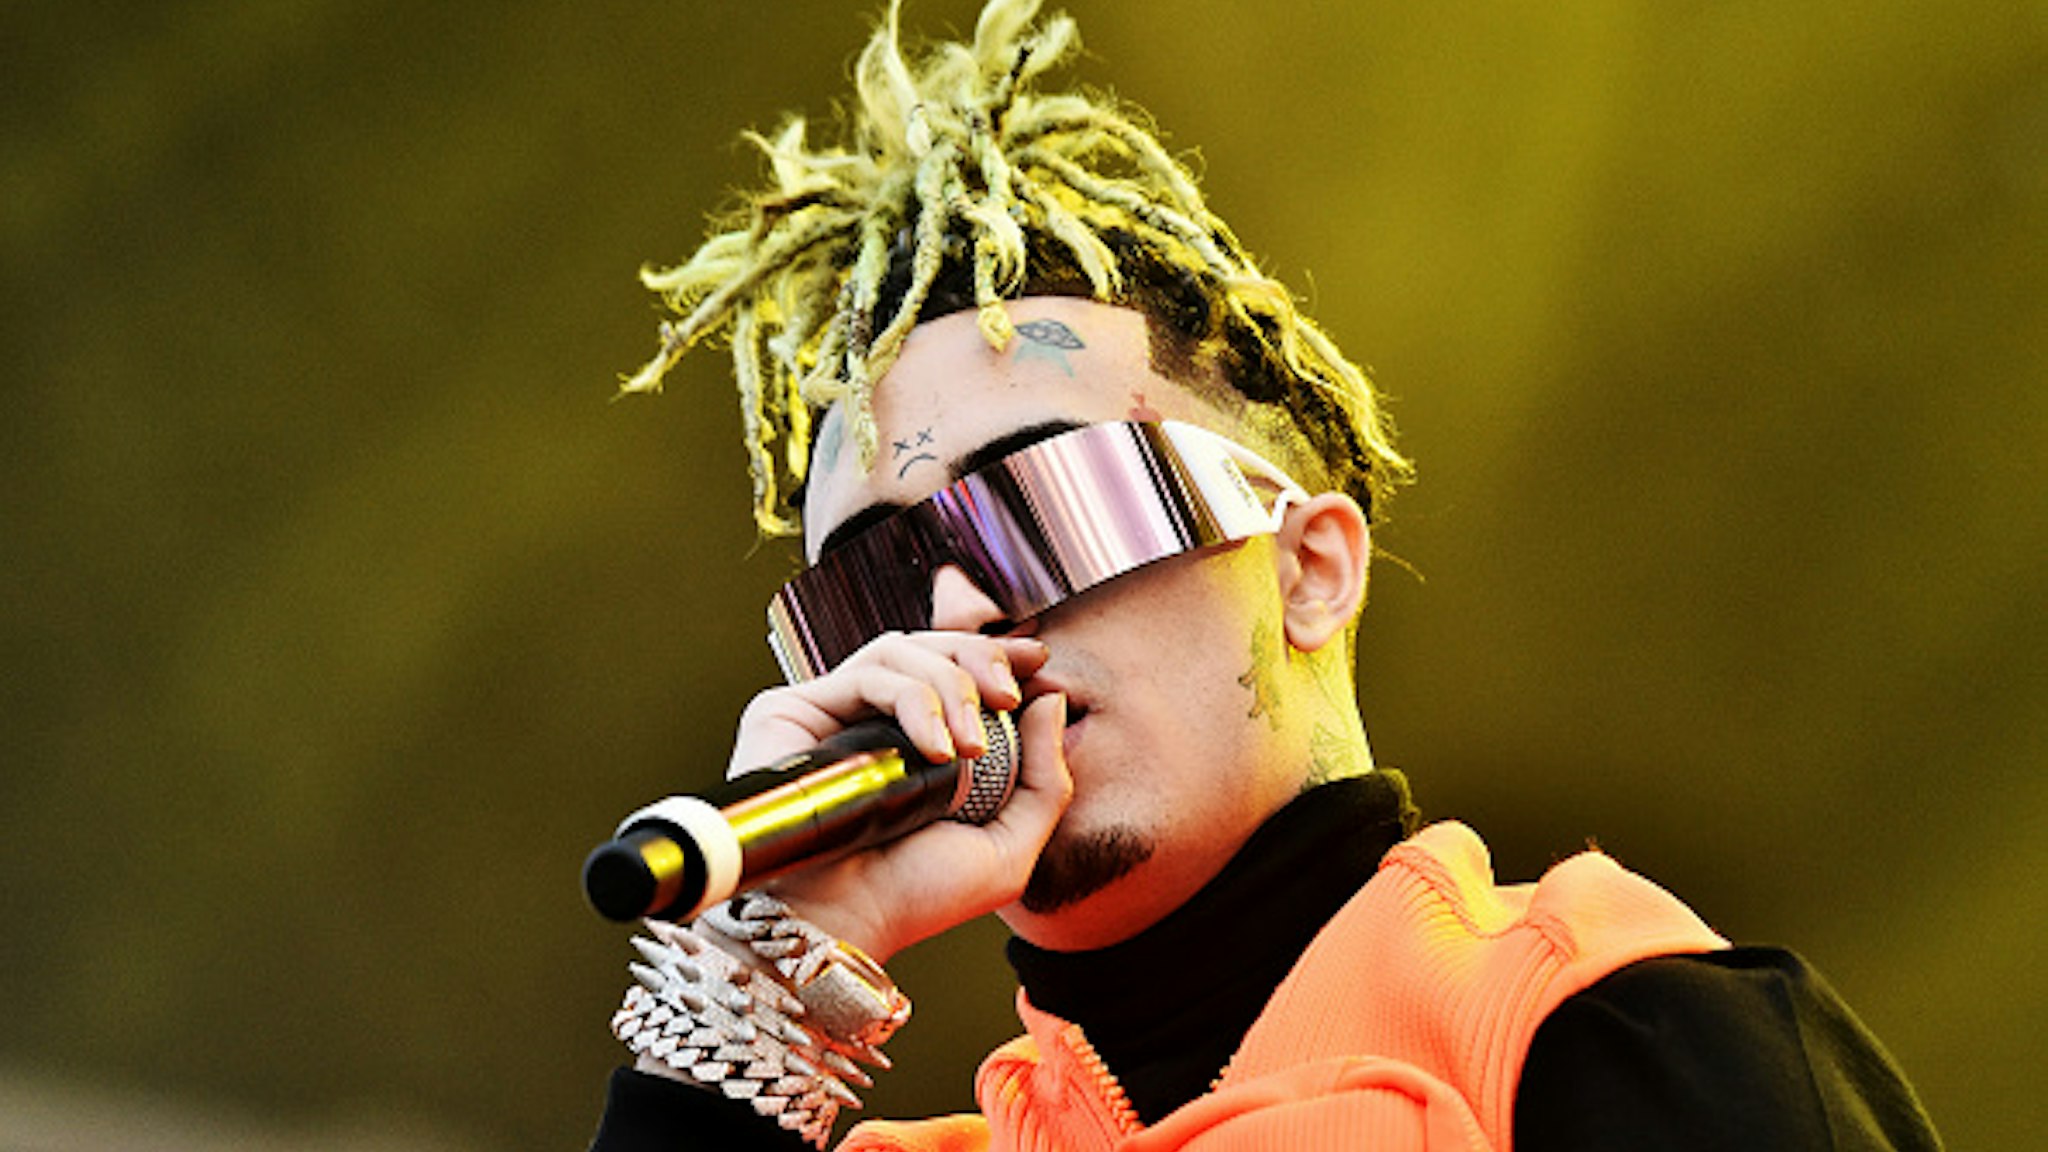 NEW YORK, NEW YORK - OCTOBER 12: Lil Pump performs during the 2019 Rolling Loud music festival at Citi Field on October 12, 2019 in New York City.